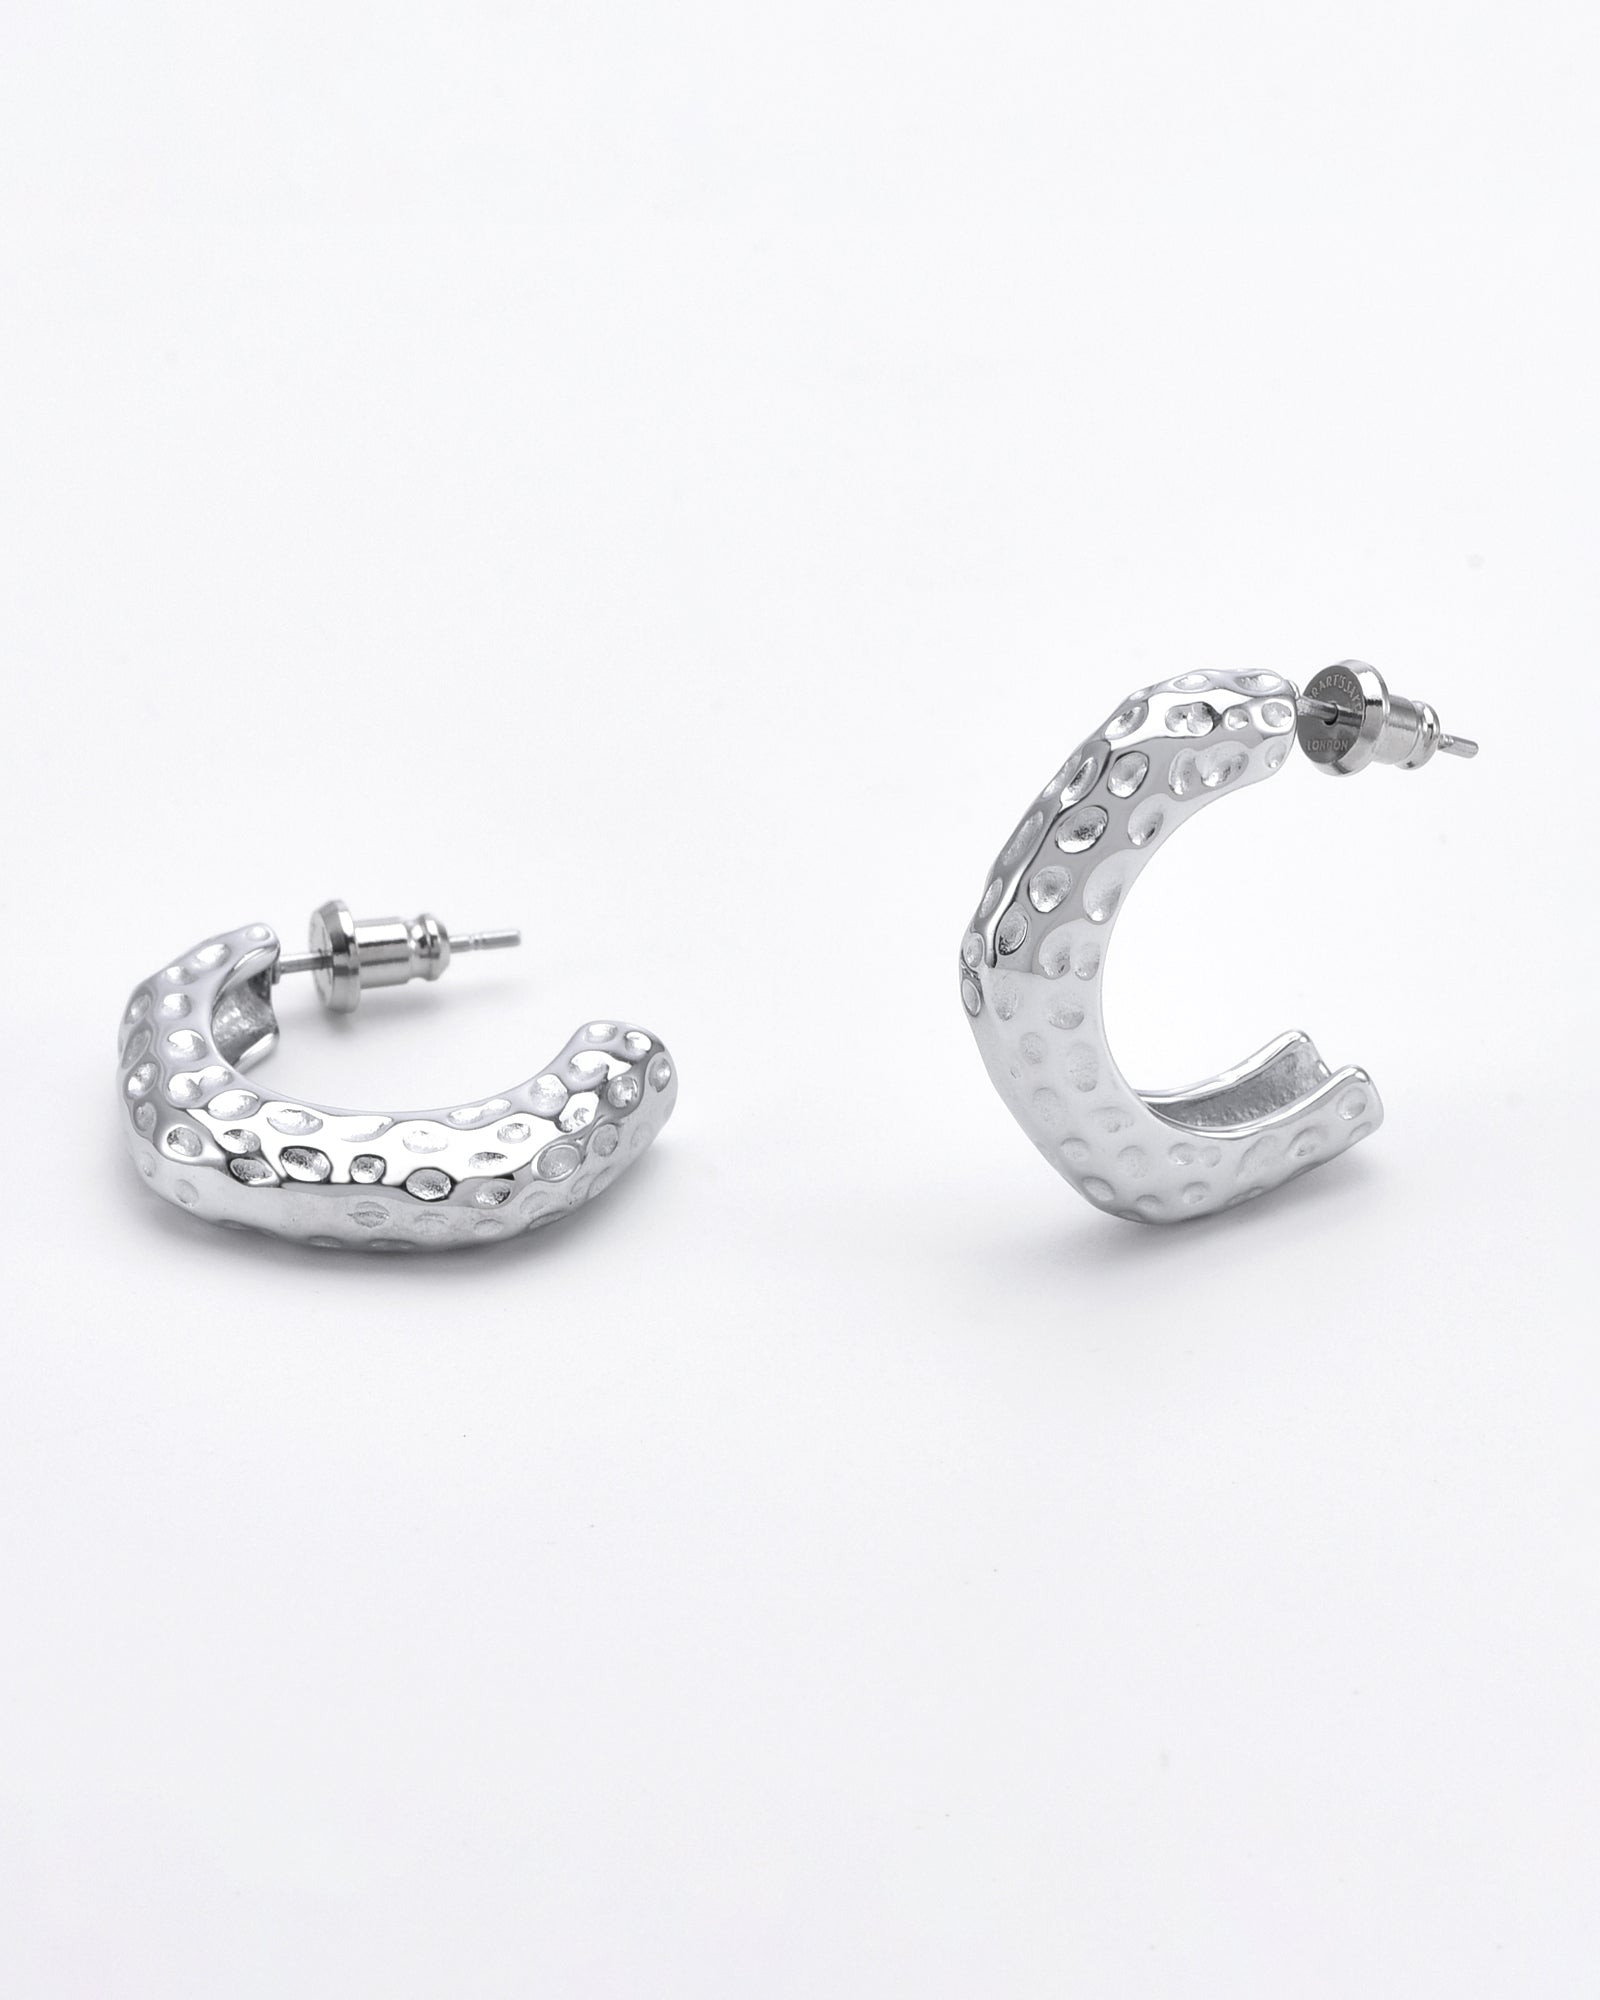 A pair of chunky, textured Mia Earrings Silver by For Art's Sake® is displayed. One earring lies flat, showing its palladium-plated surface, while the other stands upright, partially open to reveal the post and back. The background is plain and white, highlighting the earrings' intricate details.